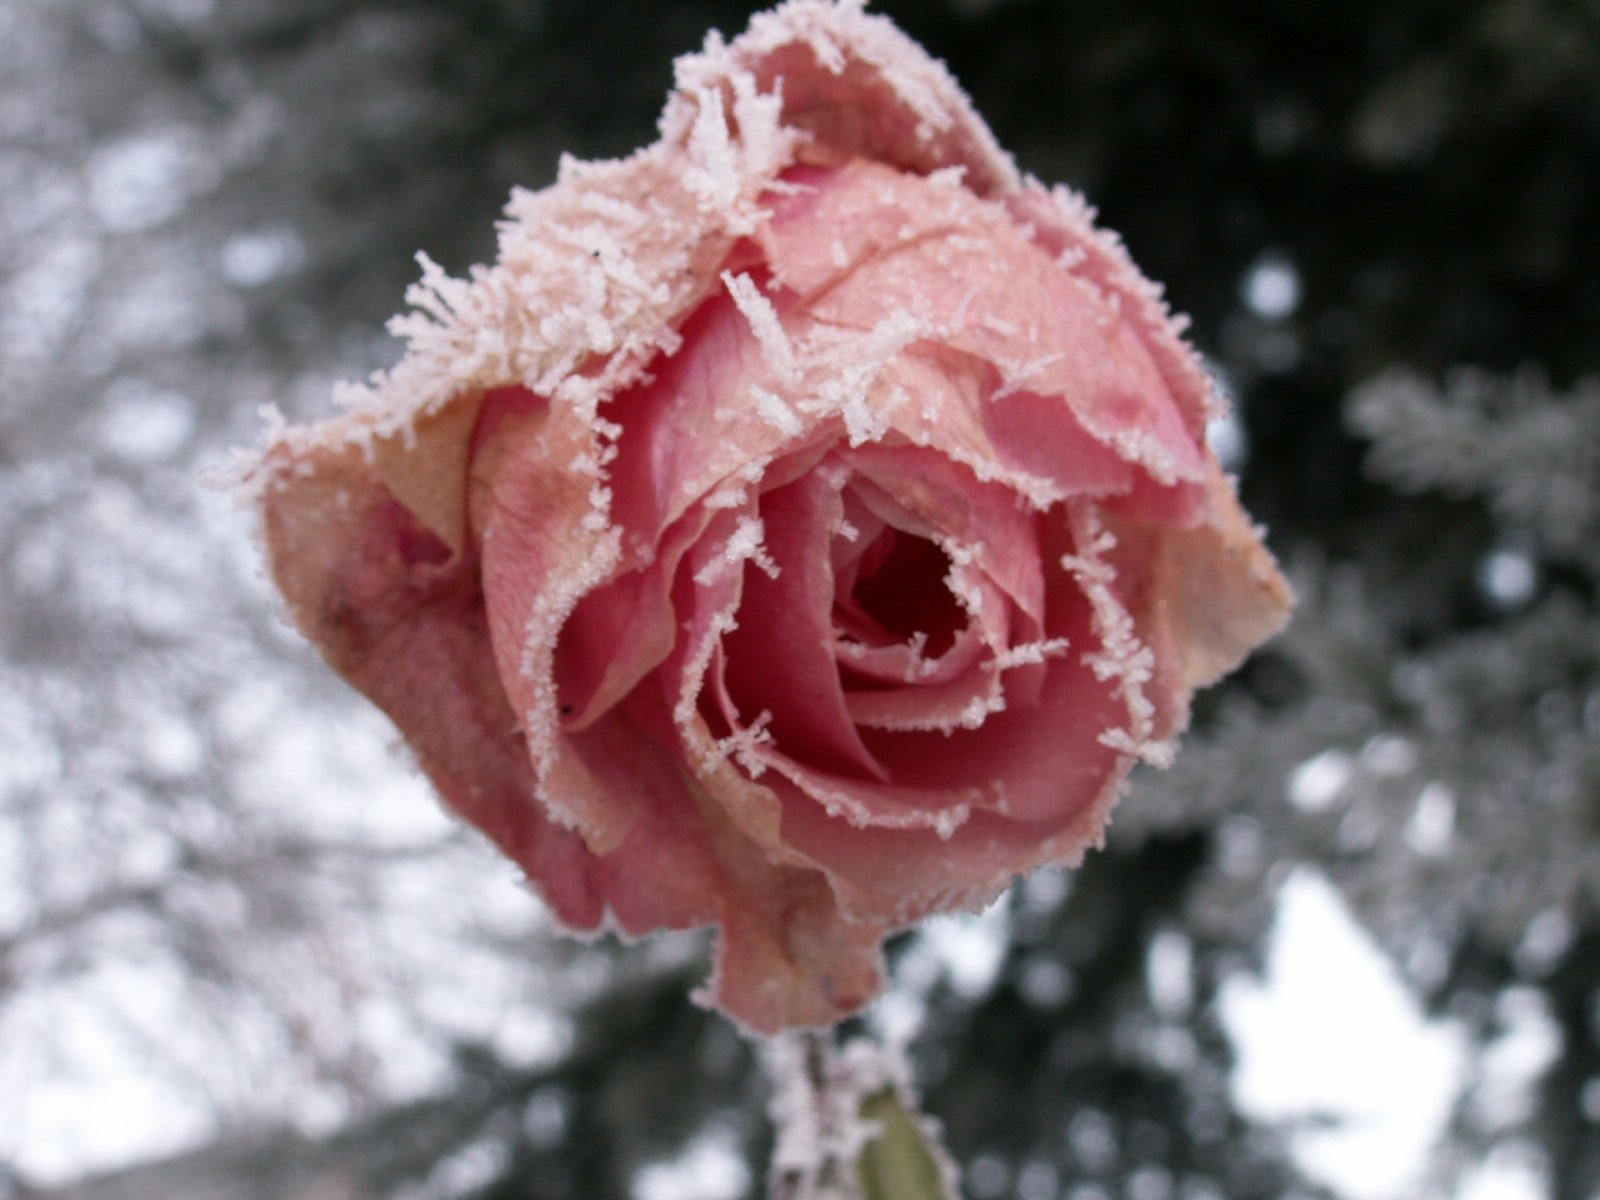 pink rose with ice on it near tree nches